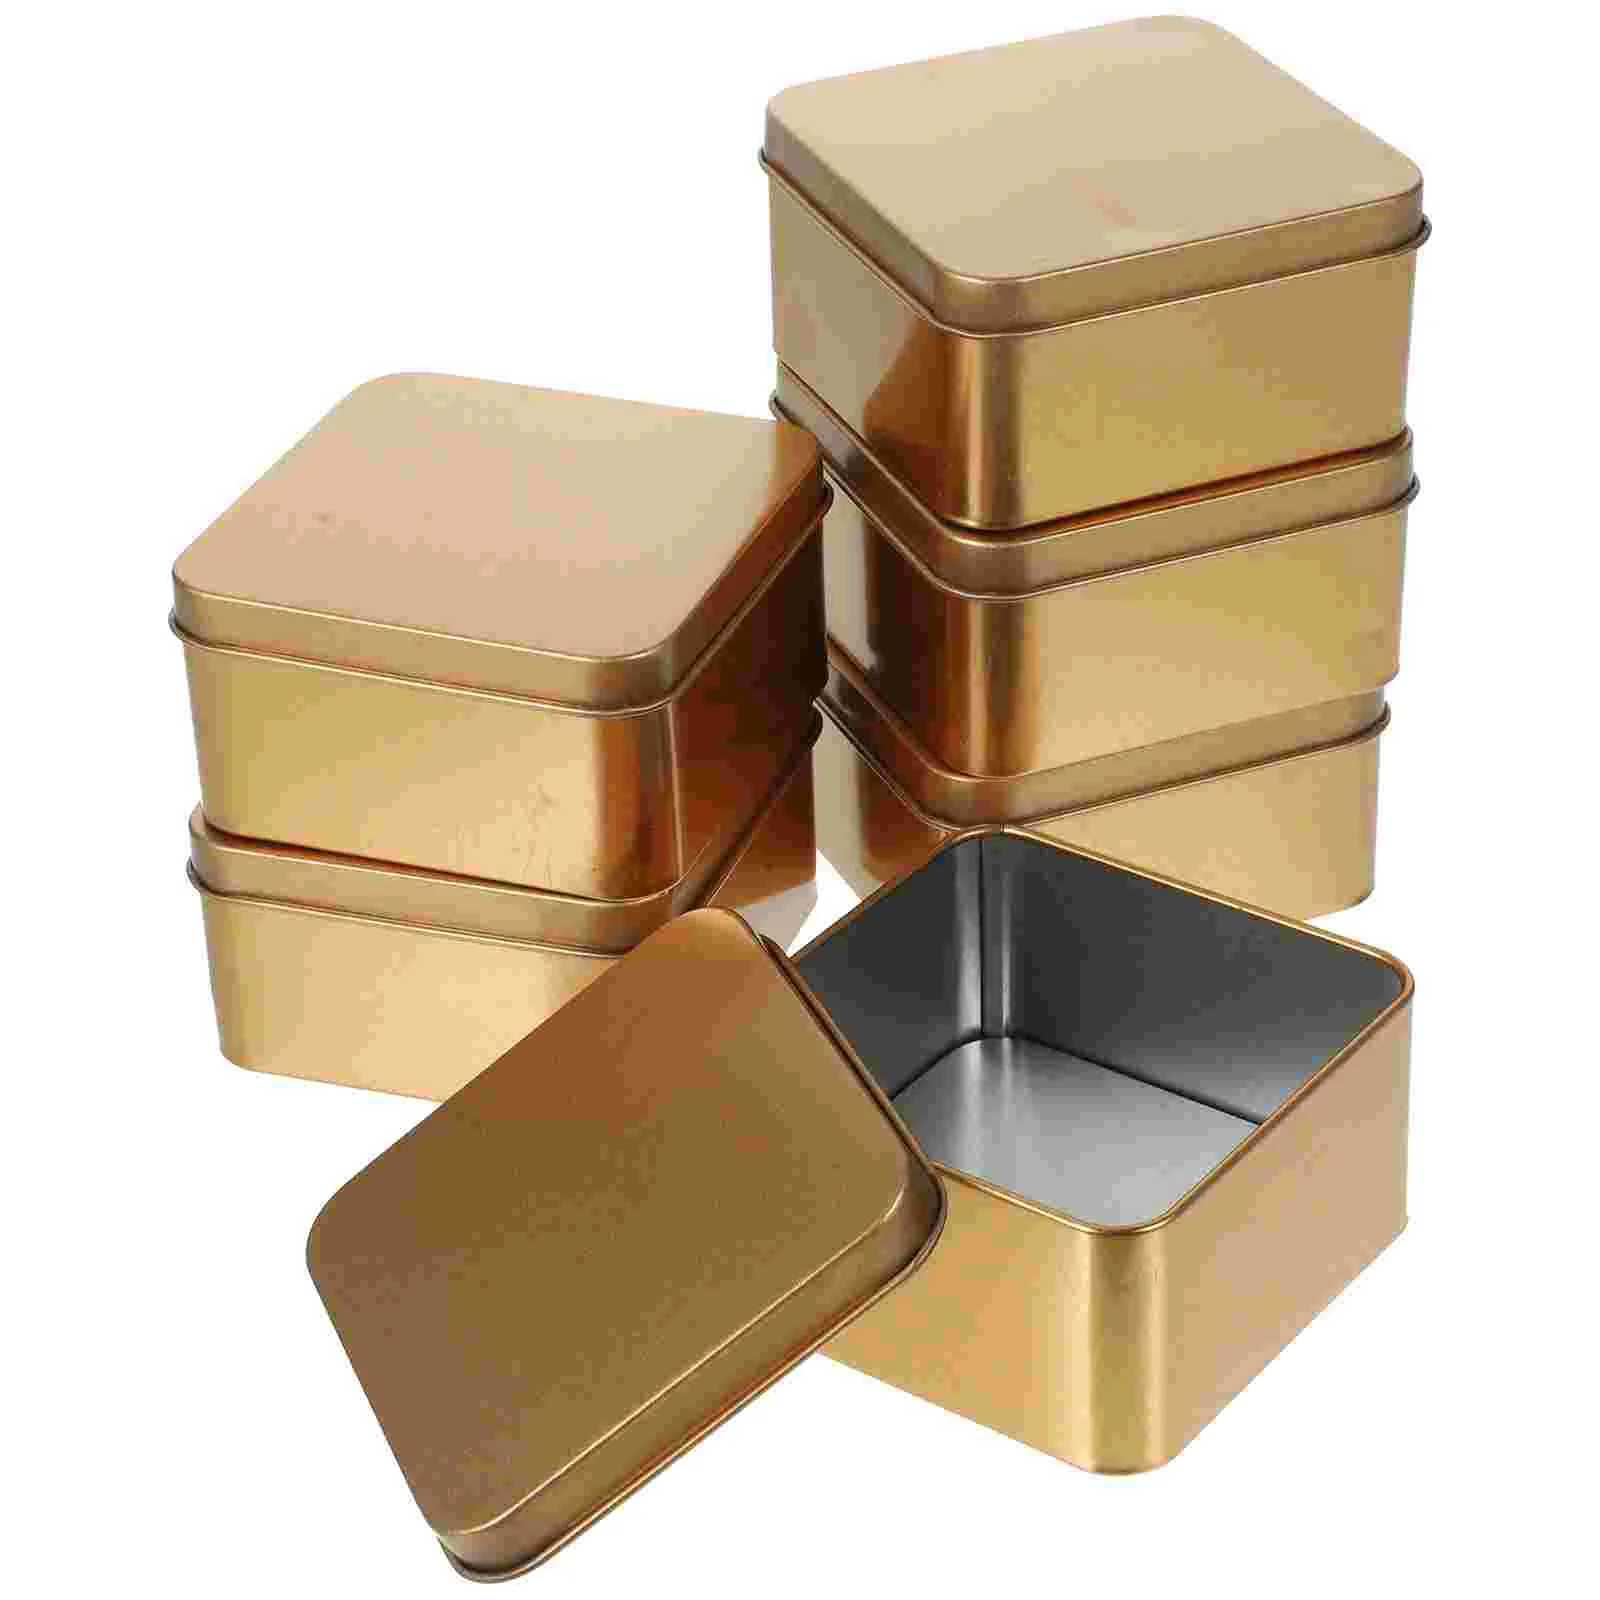 

Cookie Tins With Lids Tinplate Storage Containers Tea Jars For Loose Metal Can Sugar Cube